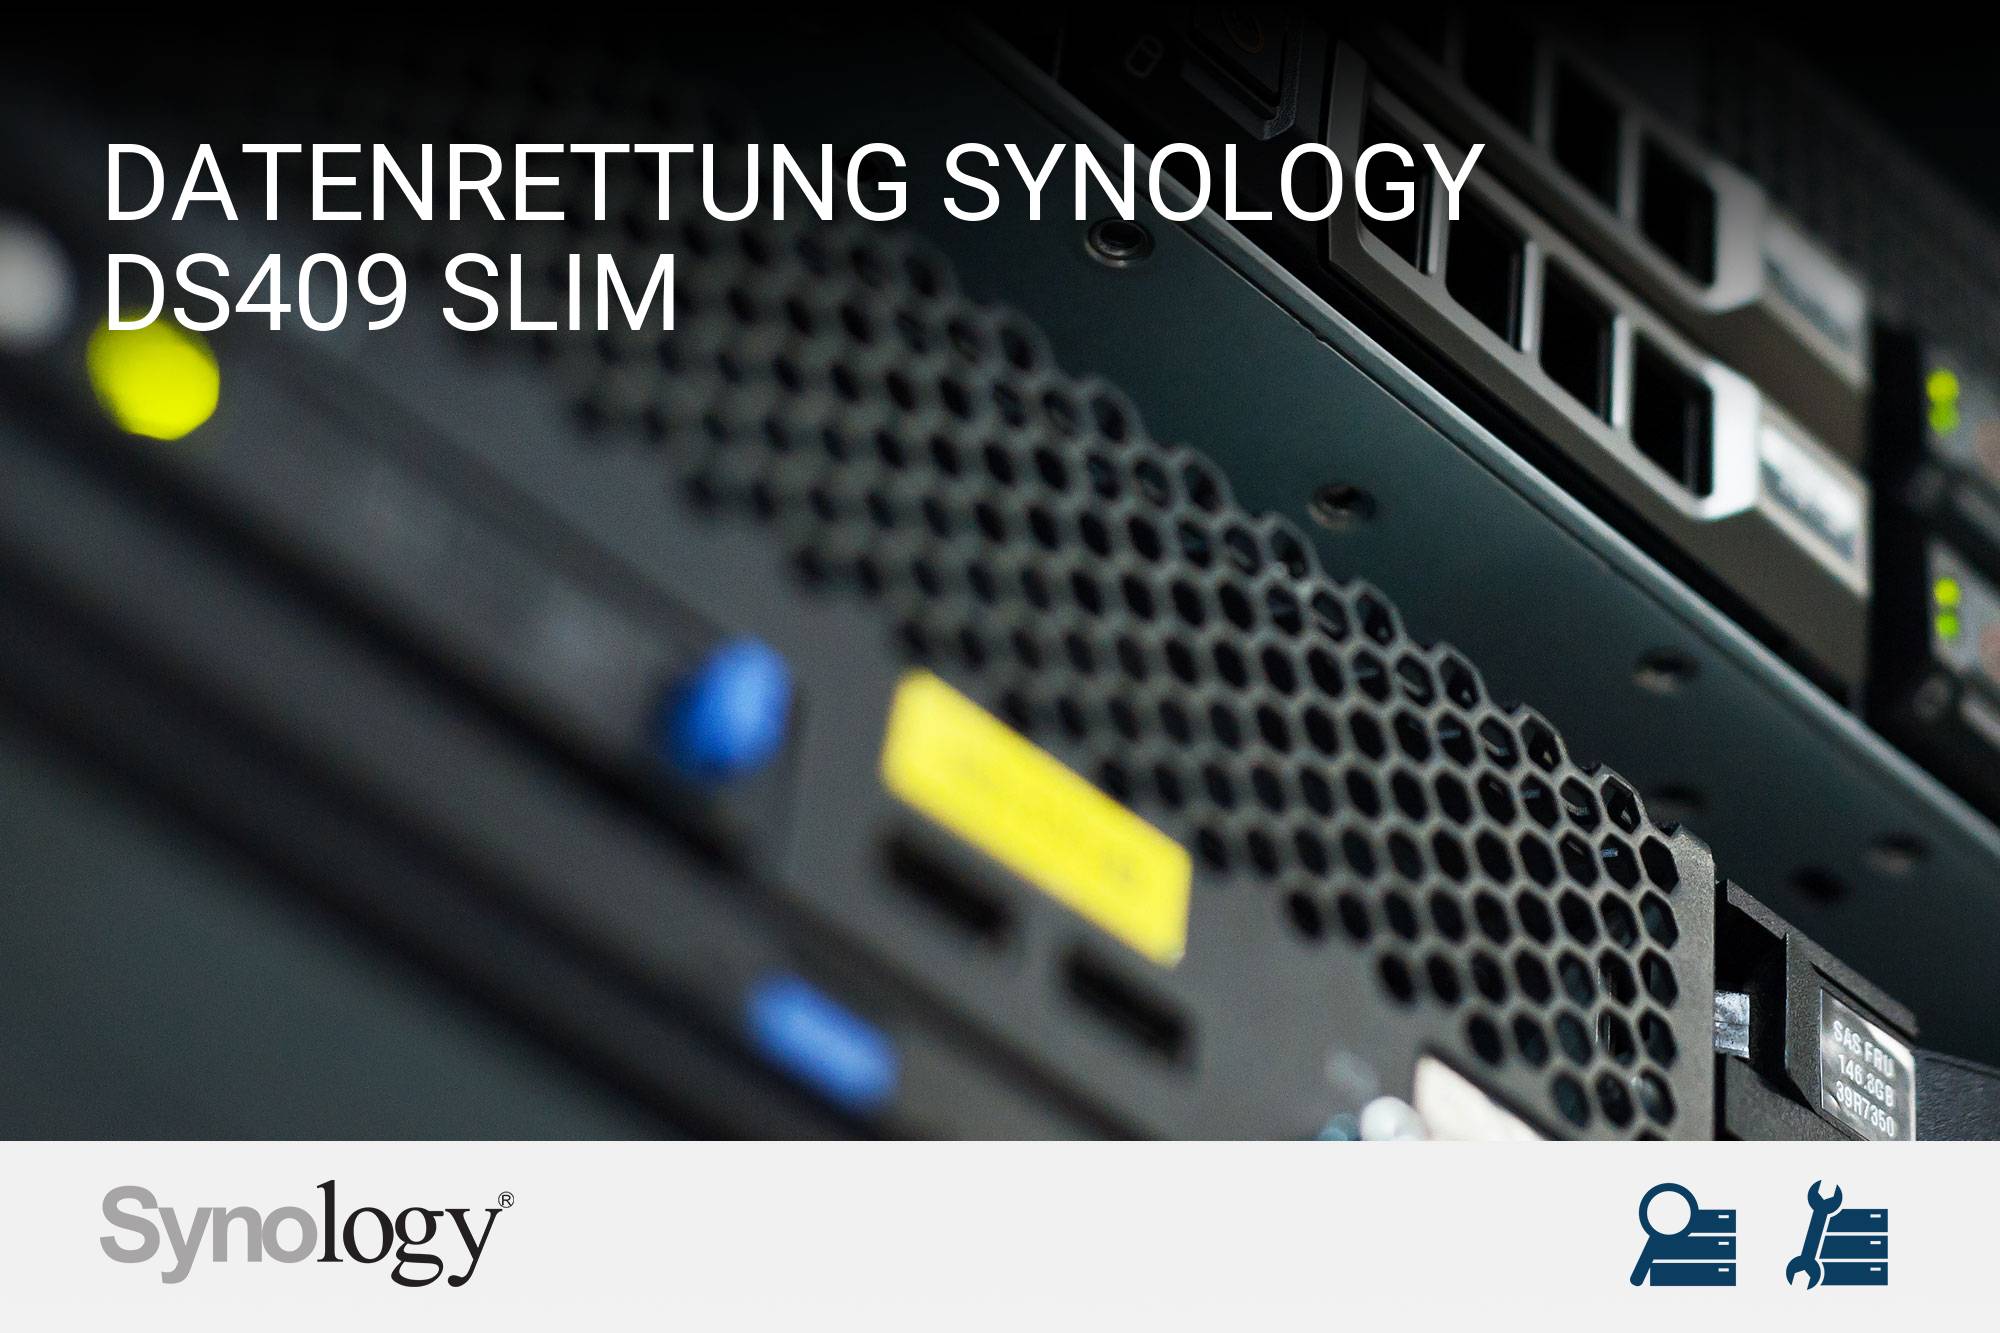 Synology DS409 slim